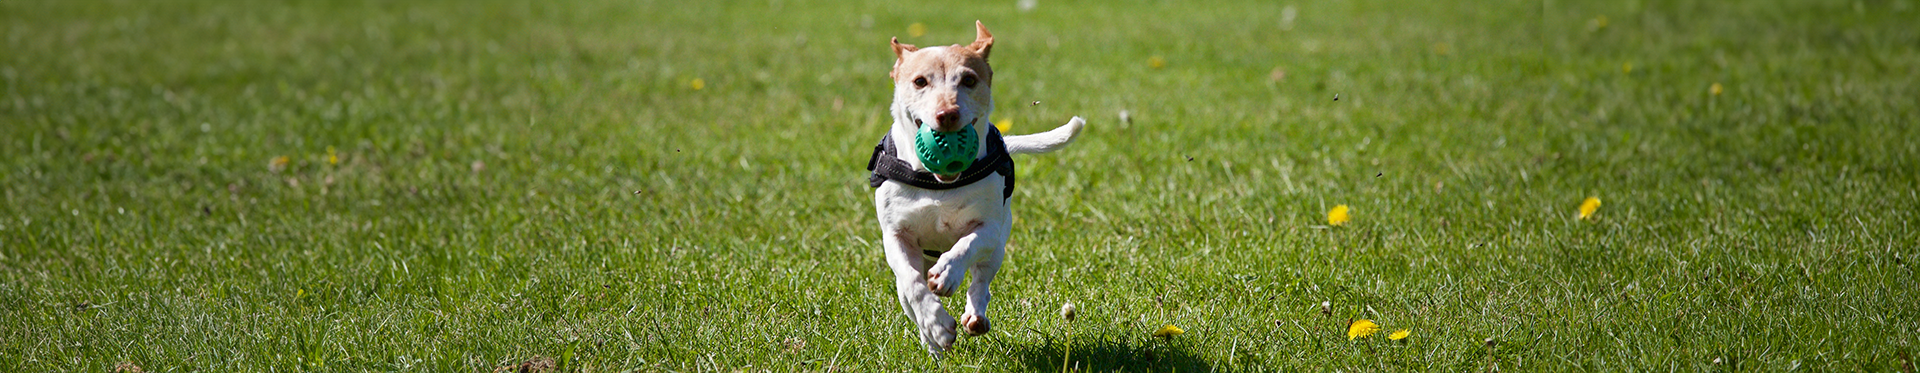 Light colored dog retrieving a green ball for its owner